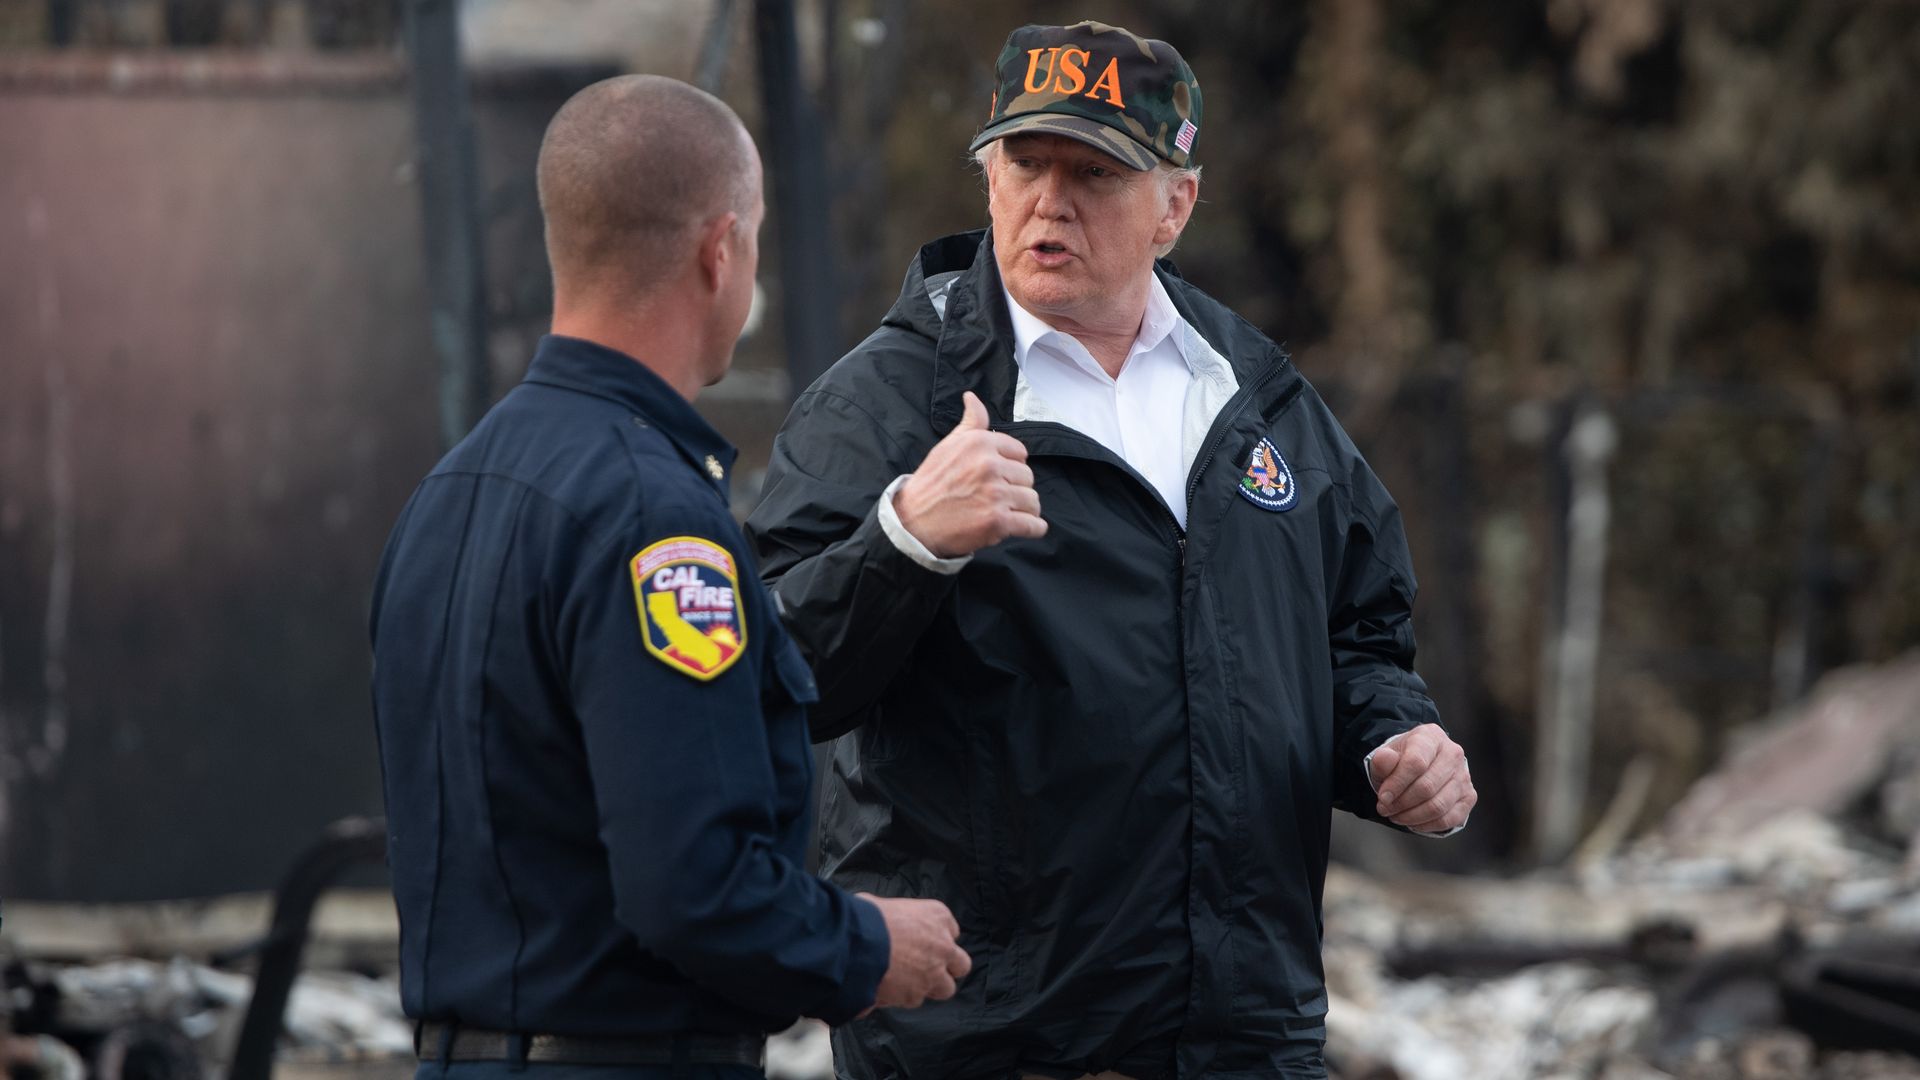 Trump with officer in california